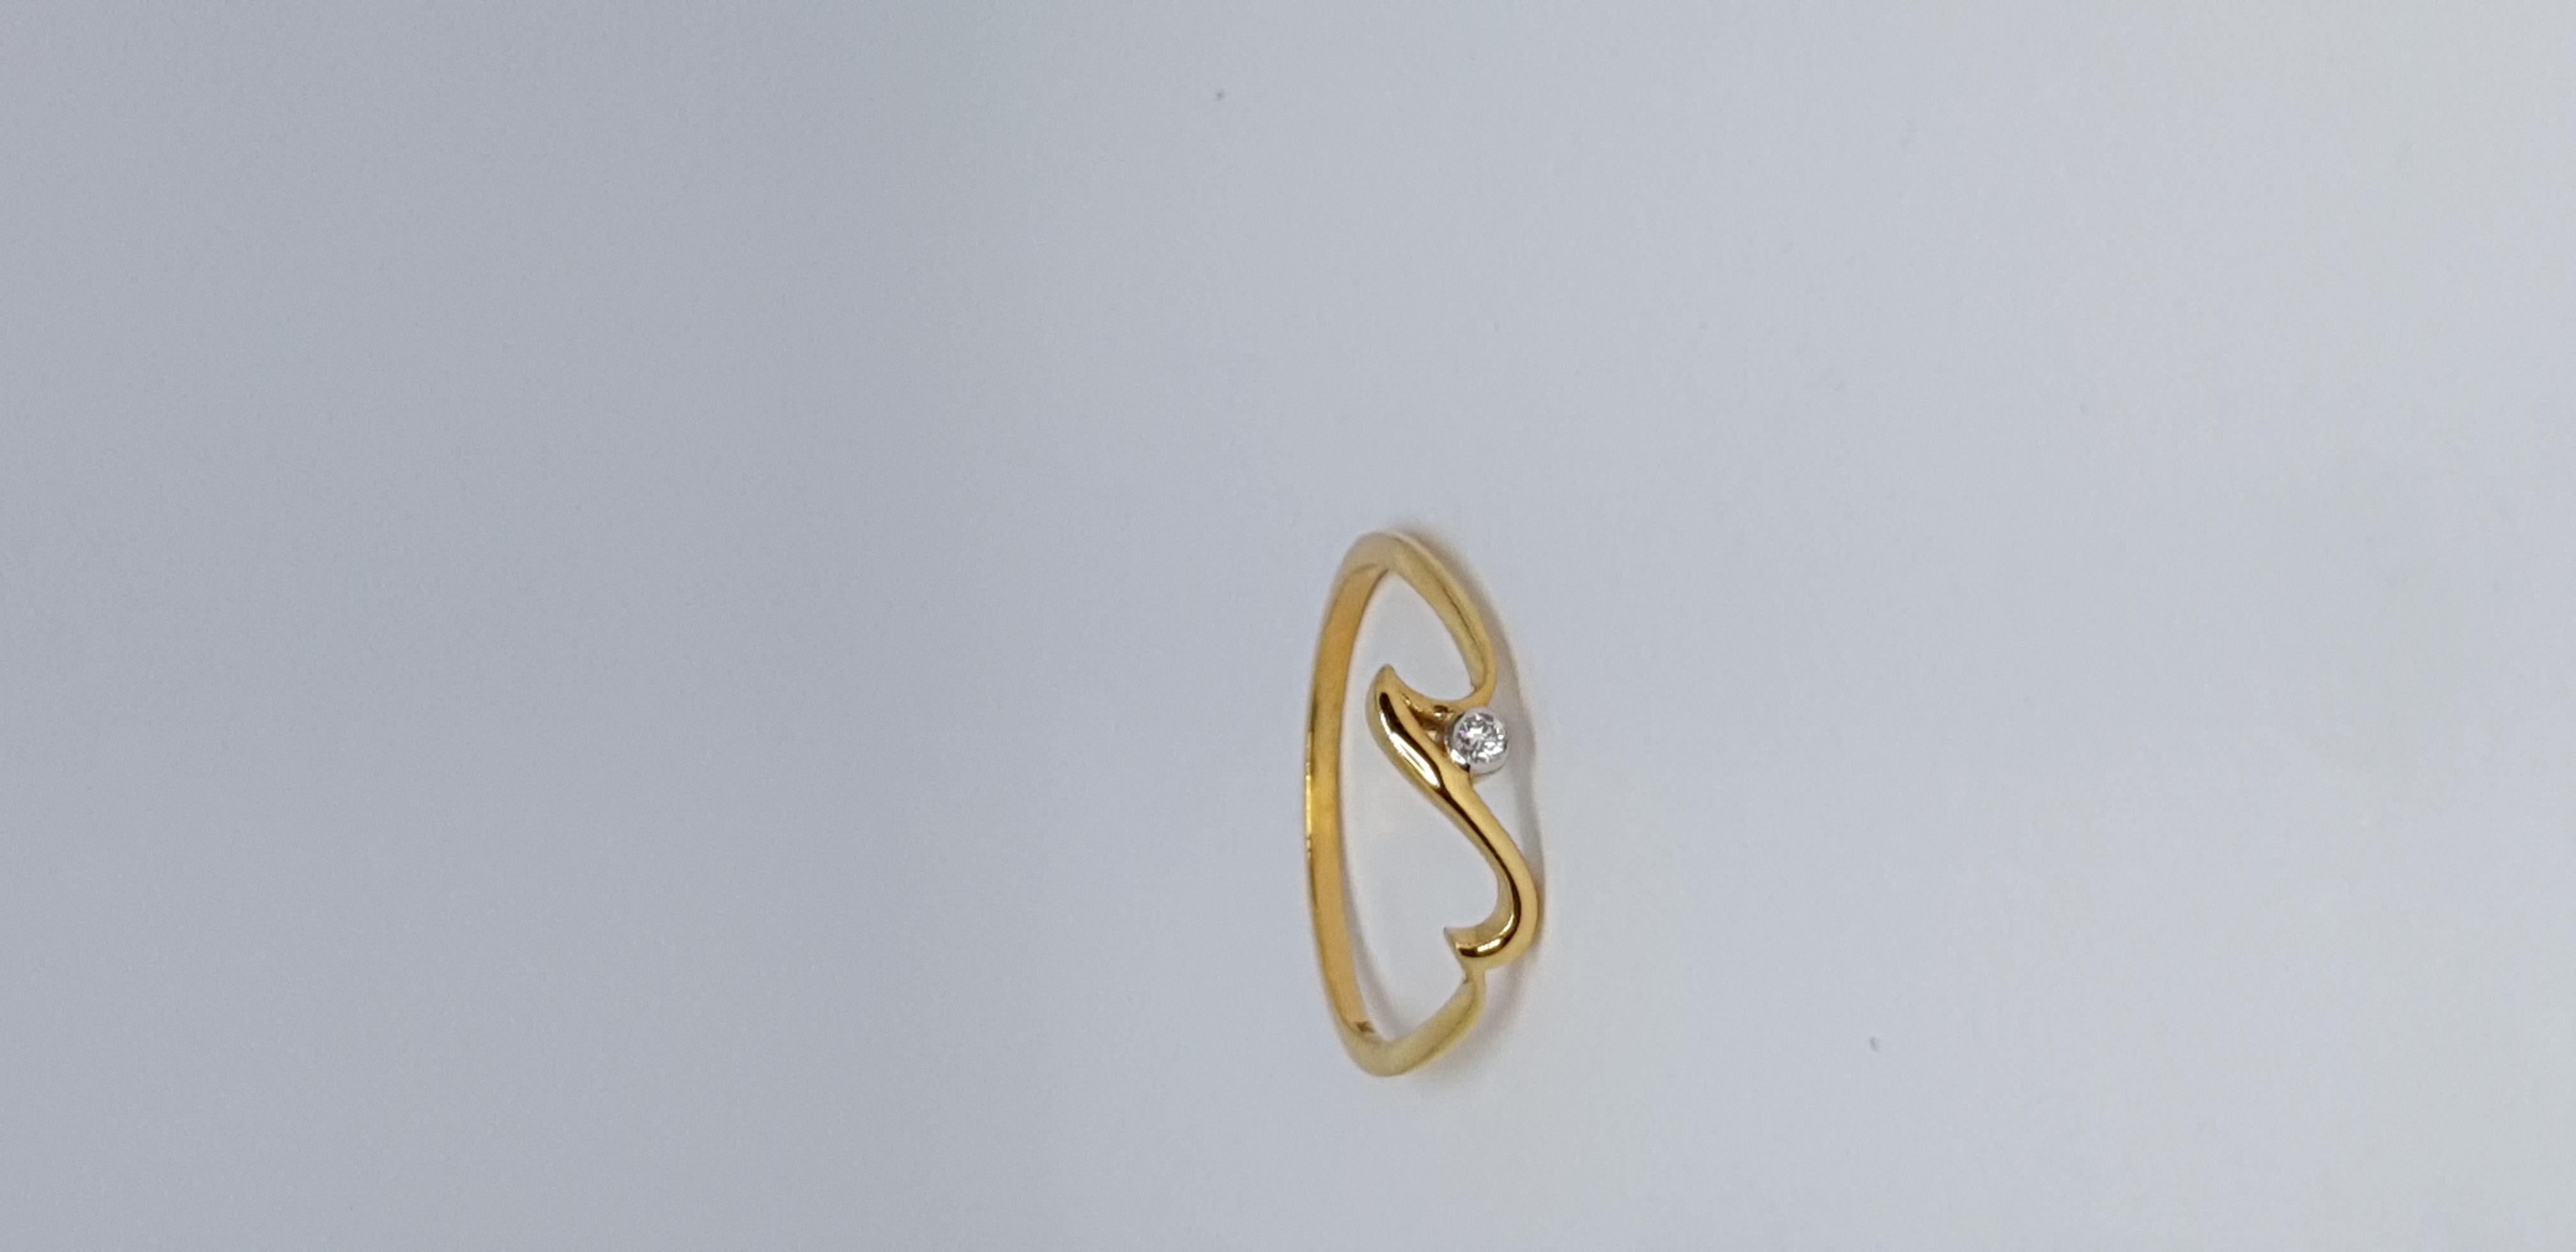 For Sale:  Natural Diamond Wave Ring 14K Solid Gold Dainty Ocean Lover Jewelry Gift. 9